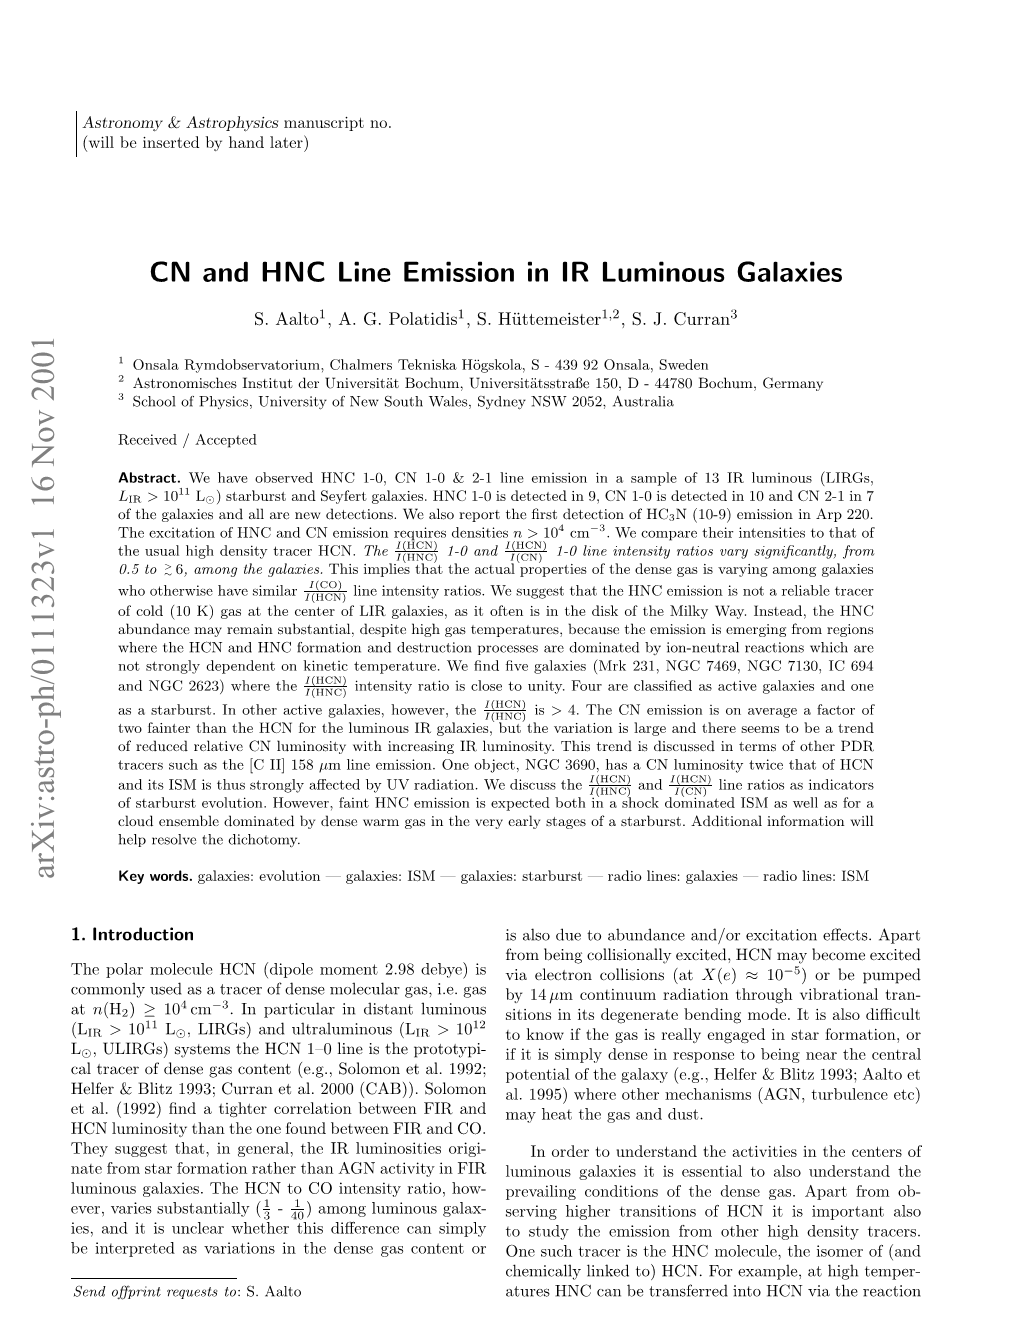 CN and HNC Line Emission in IR Luminous Galaxies